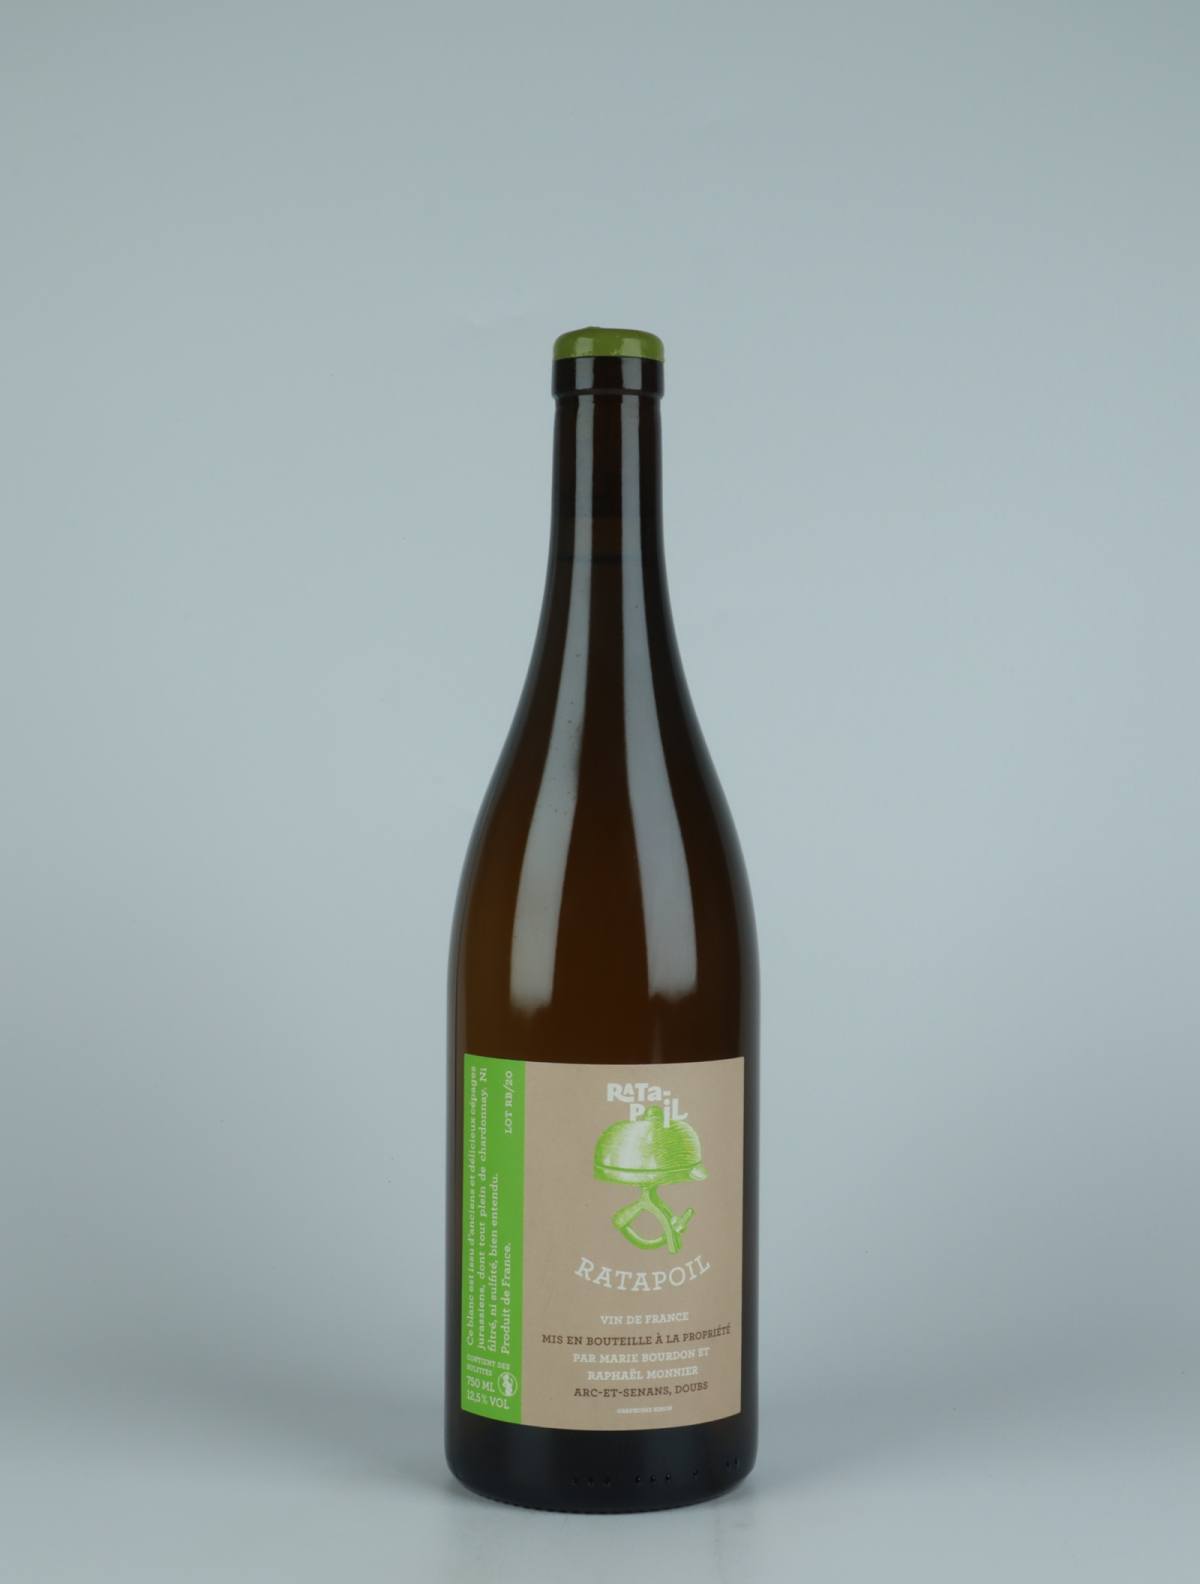 A bottle 2020 Ratapoil Blanc (Green label) White wine from Domaine Ratapoil, Jura in France